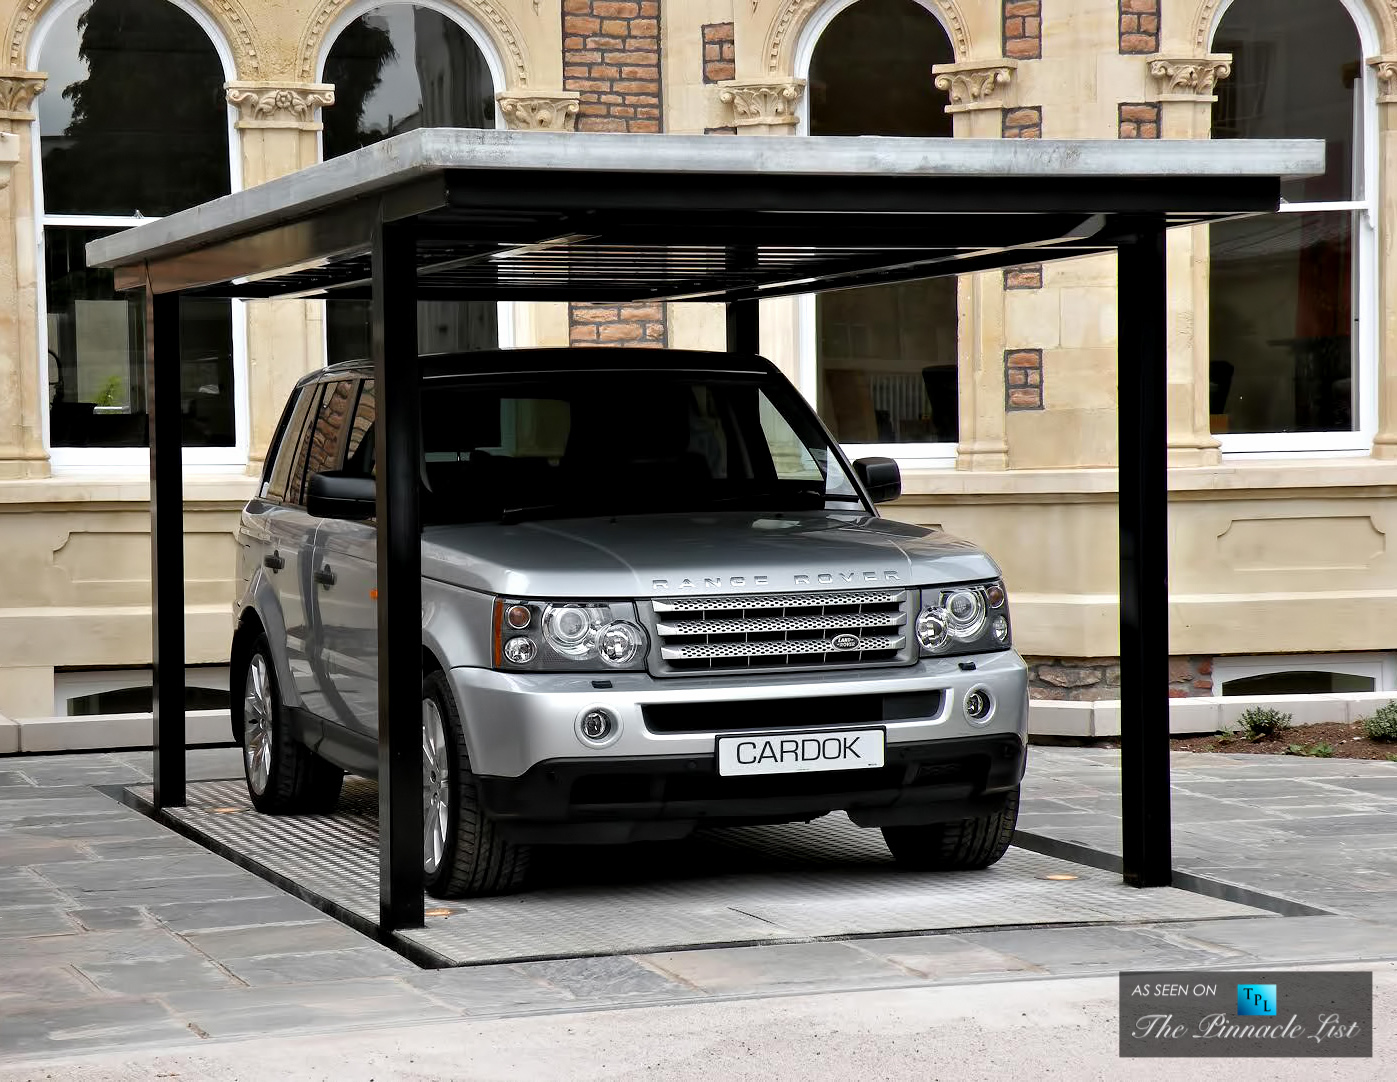 Cardok Underground Garage - The Ultimate Urban Solution for Secure Luxury Car Parking and Storage